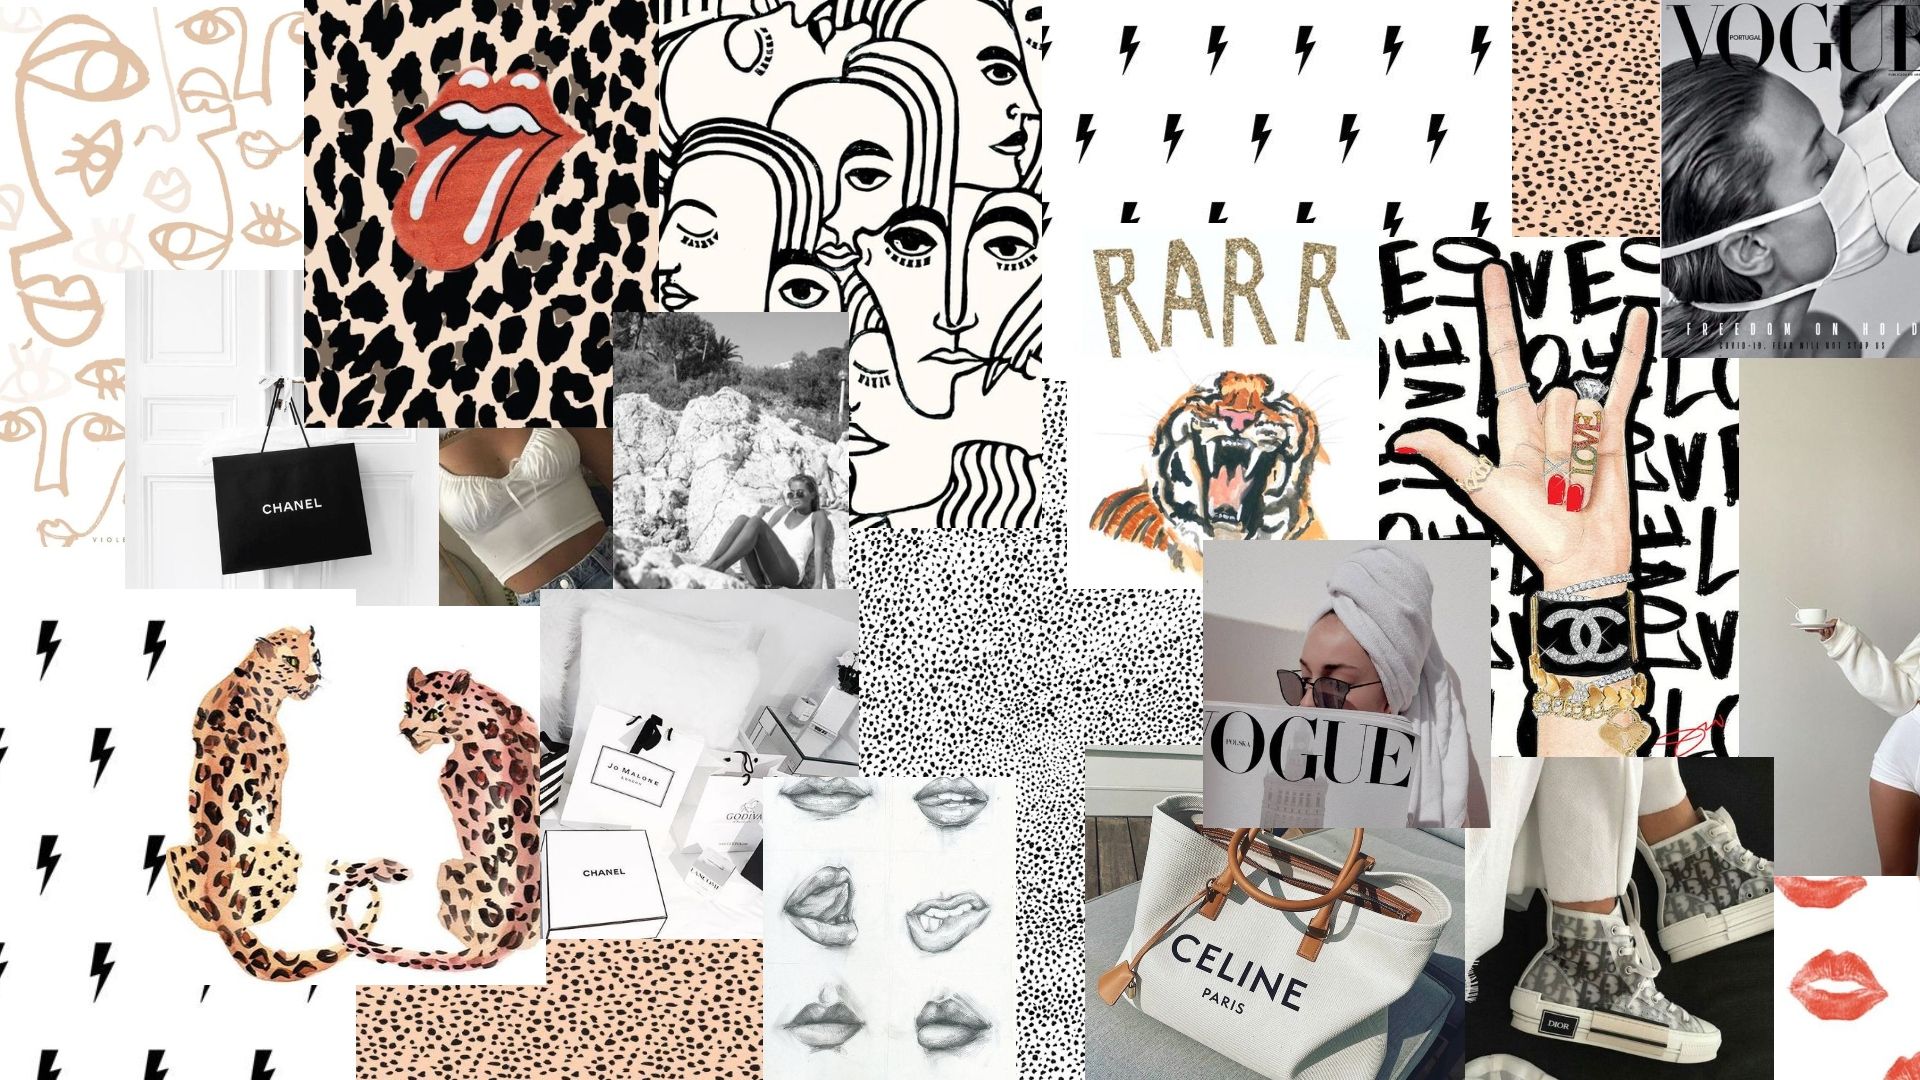 A collage of images including leopard print, lips, and a handbag. - IMac